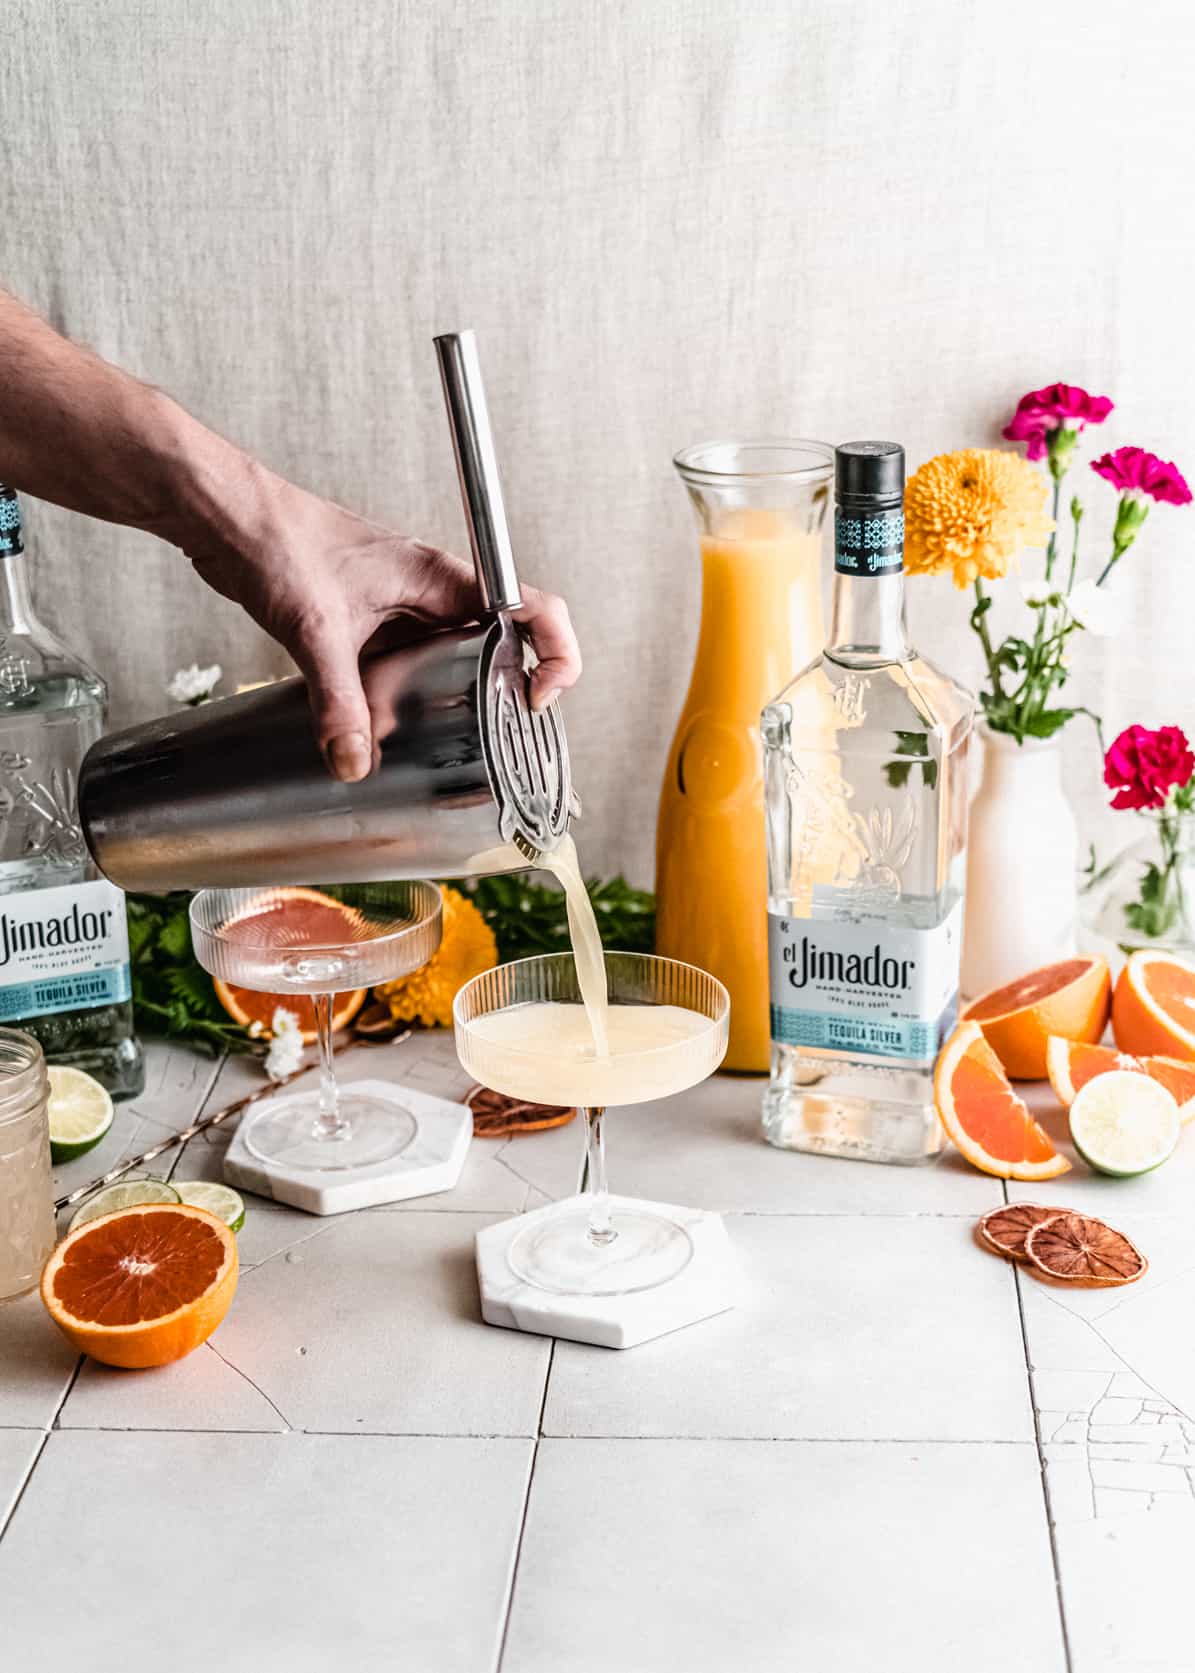 tequila spritzer being poured from cocktail shaker into cocktail glass.  Tequila bottle, orange juice and flowers in the background